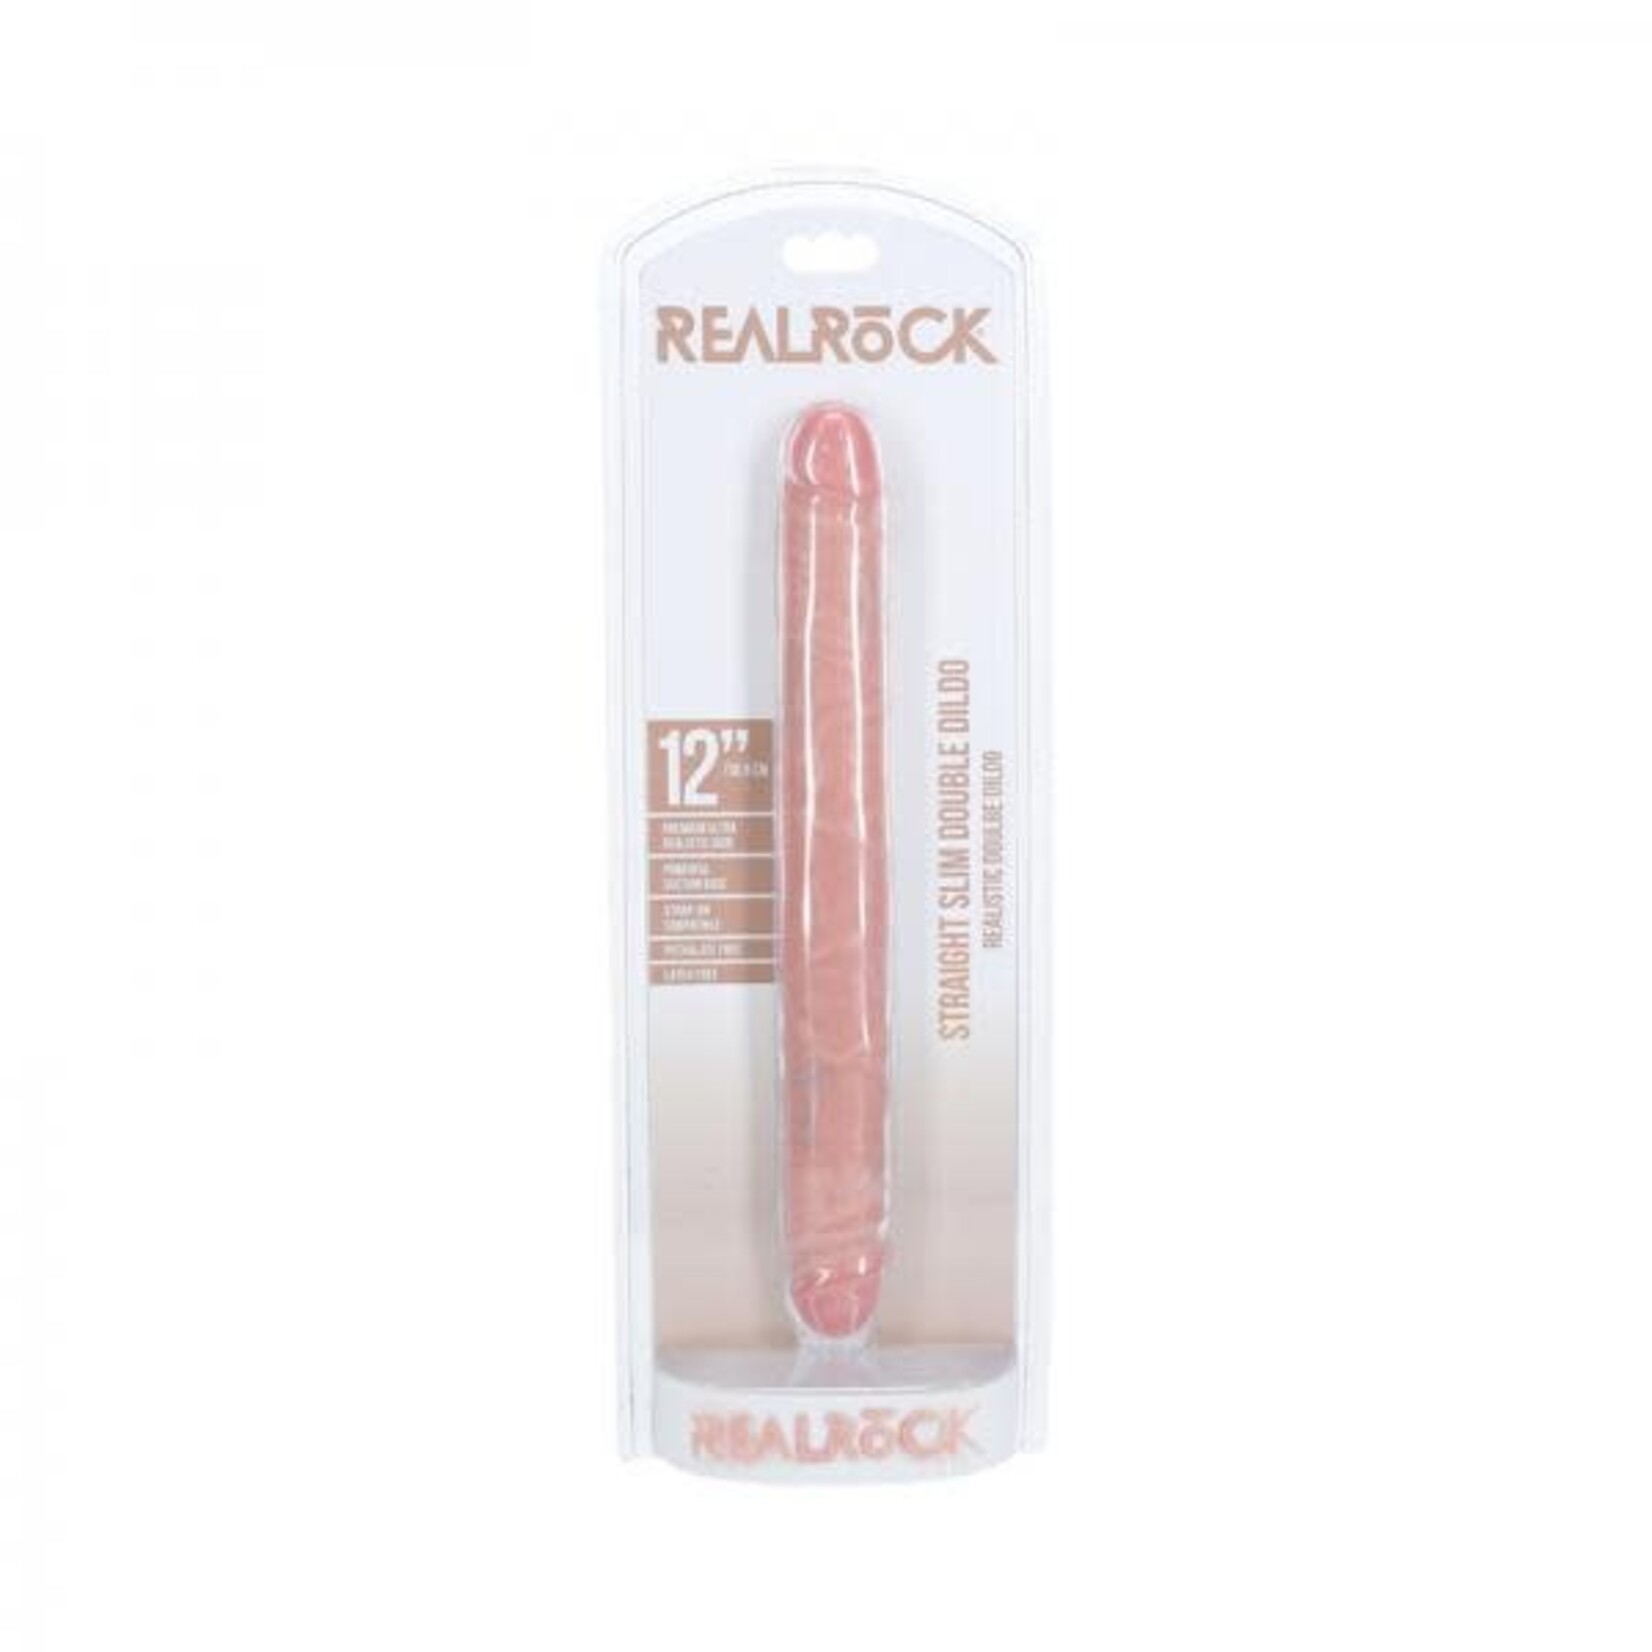 SHOTS REALROCK SLIM DOUBLE ENDED 12 INCH DILDO IN LIGHT